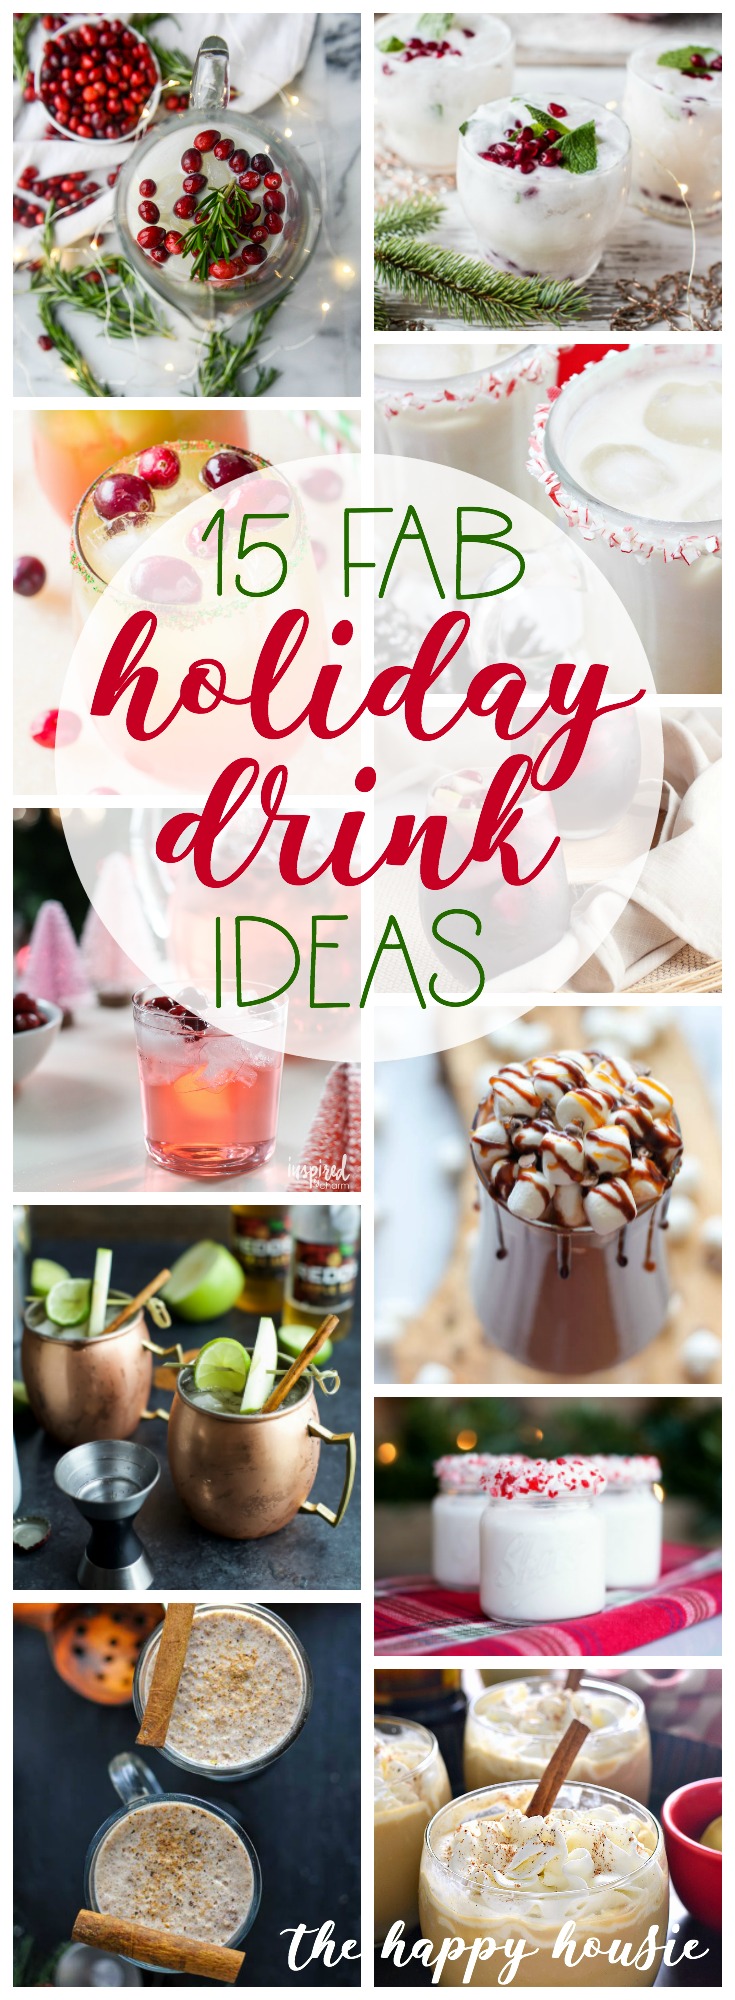 15 Fab Holiday Drink Ideas poster.